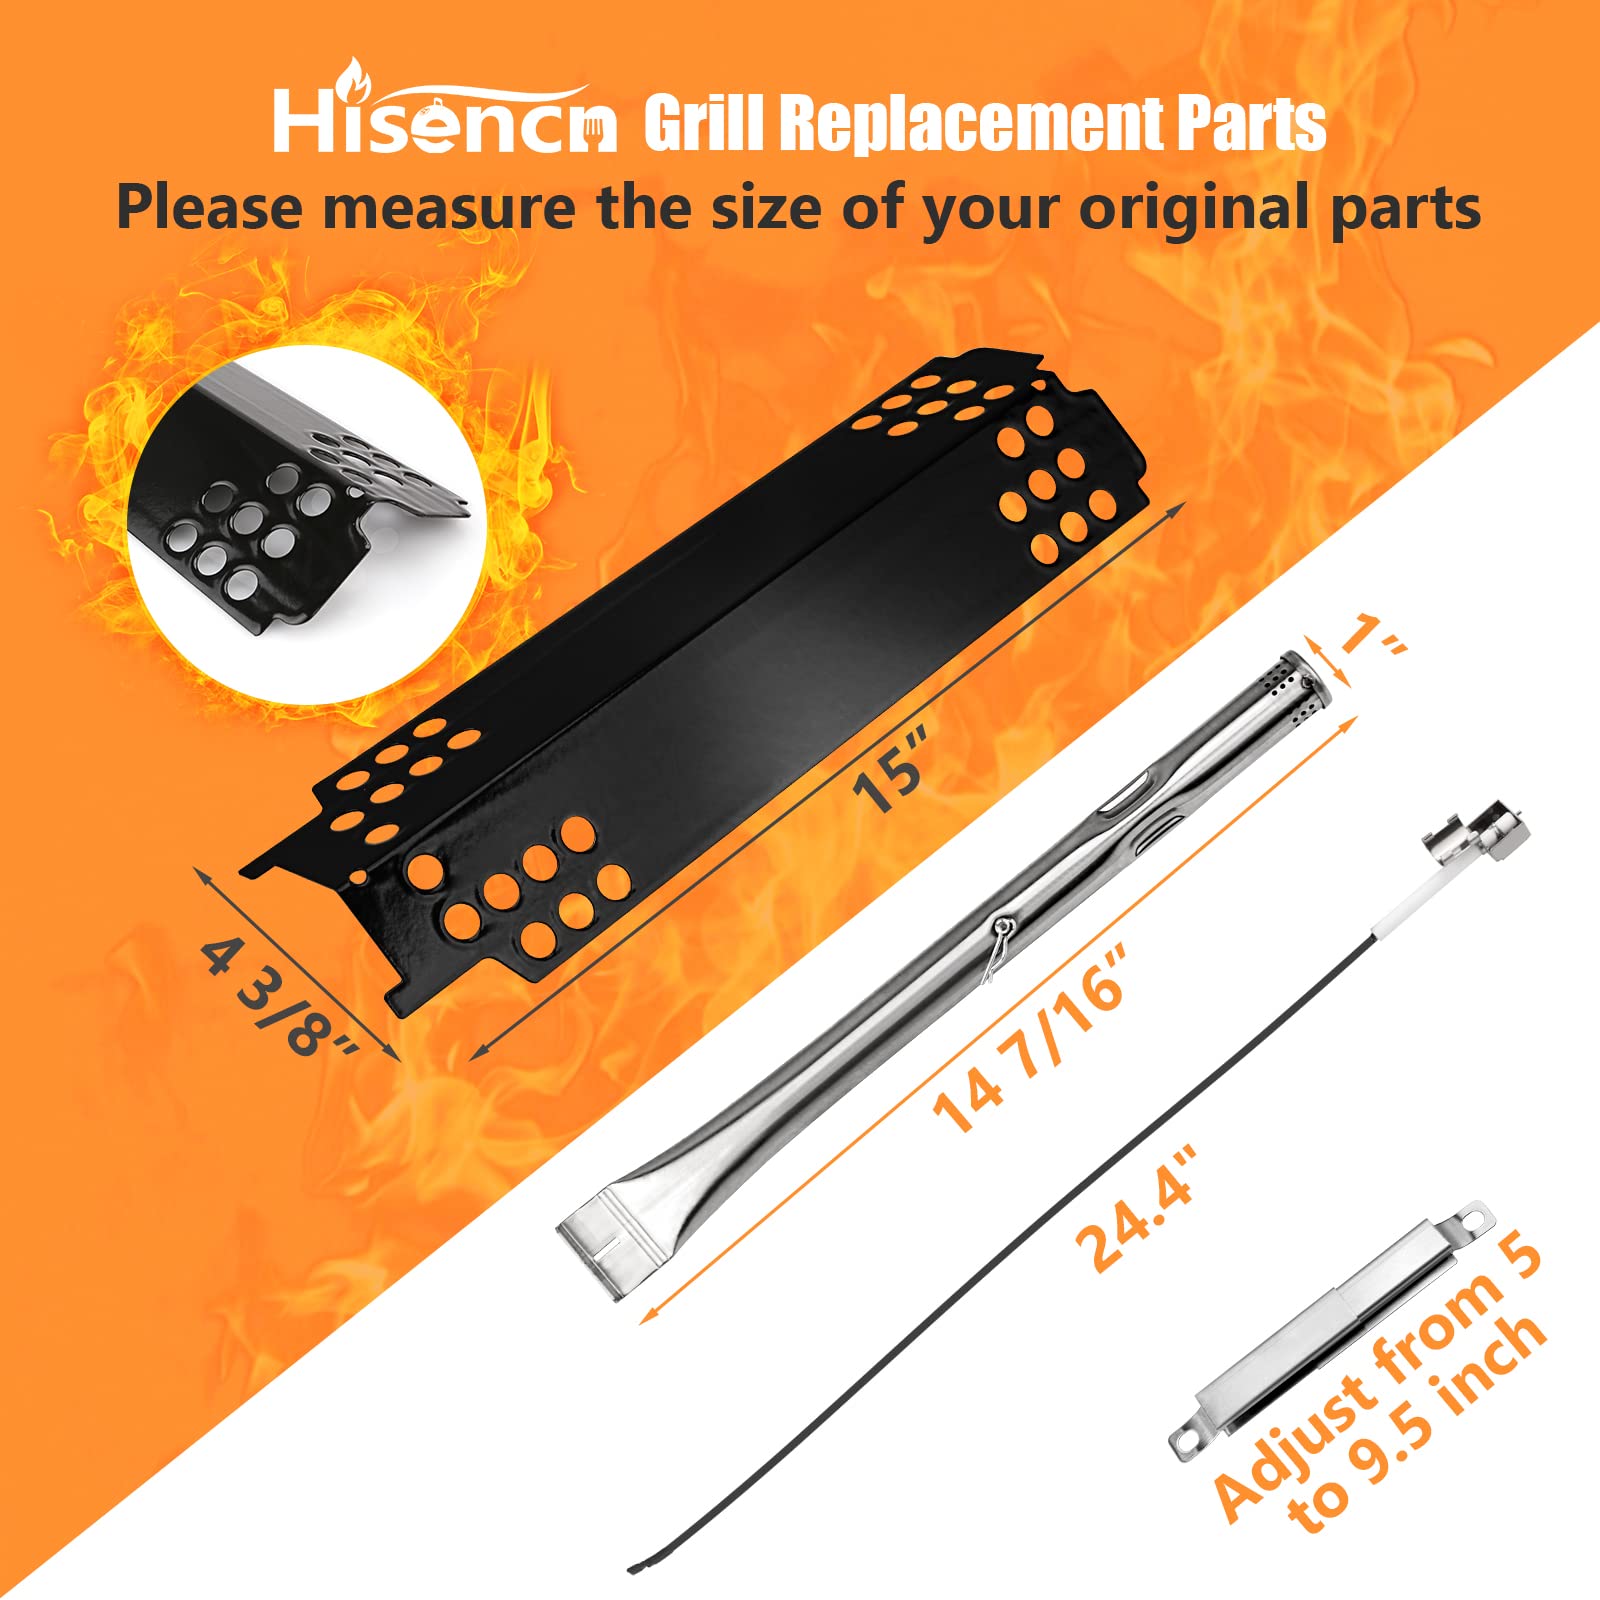 Hisencn Grill Replacement Parts for Charbroil 463436215, 463436214, 463436213, 463439915, 467300115, 463439914, 461372517, G432-